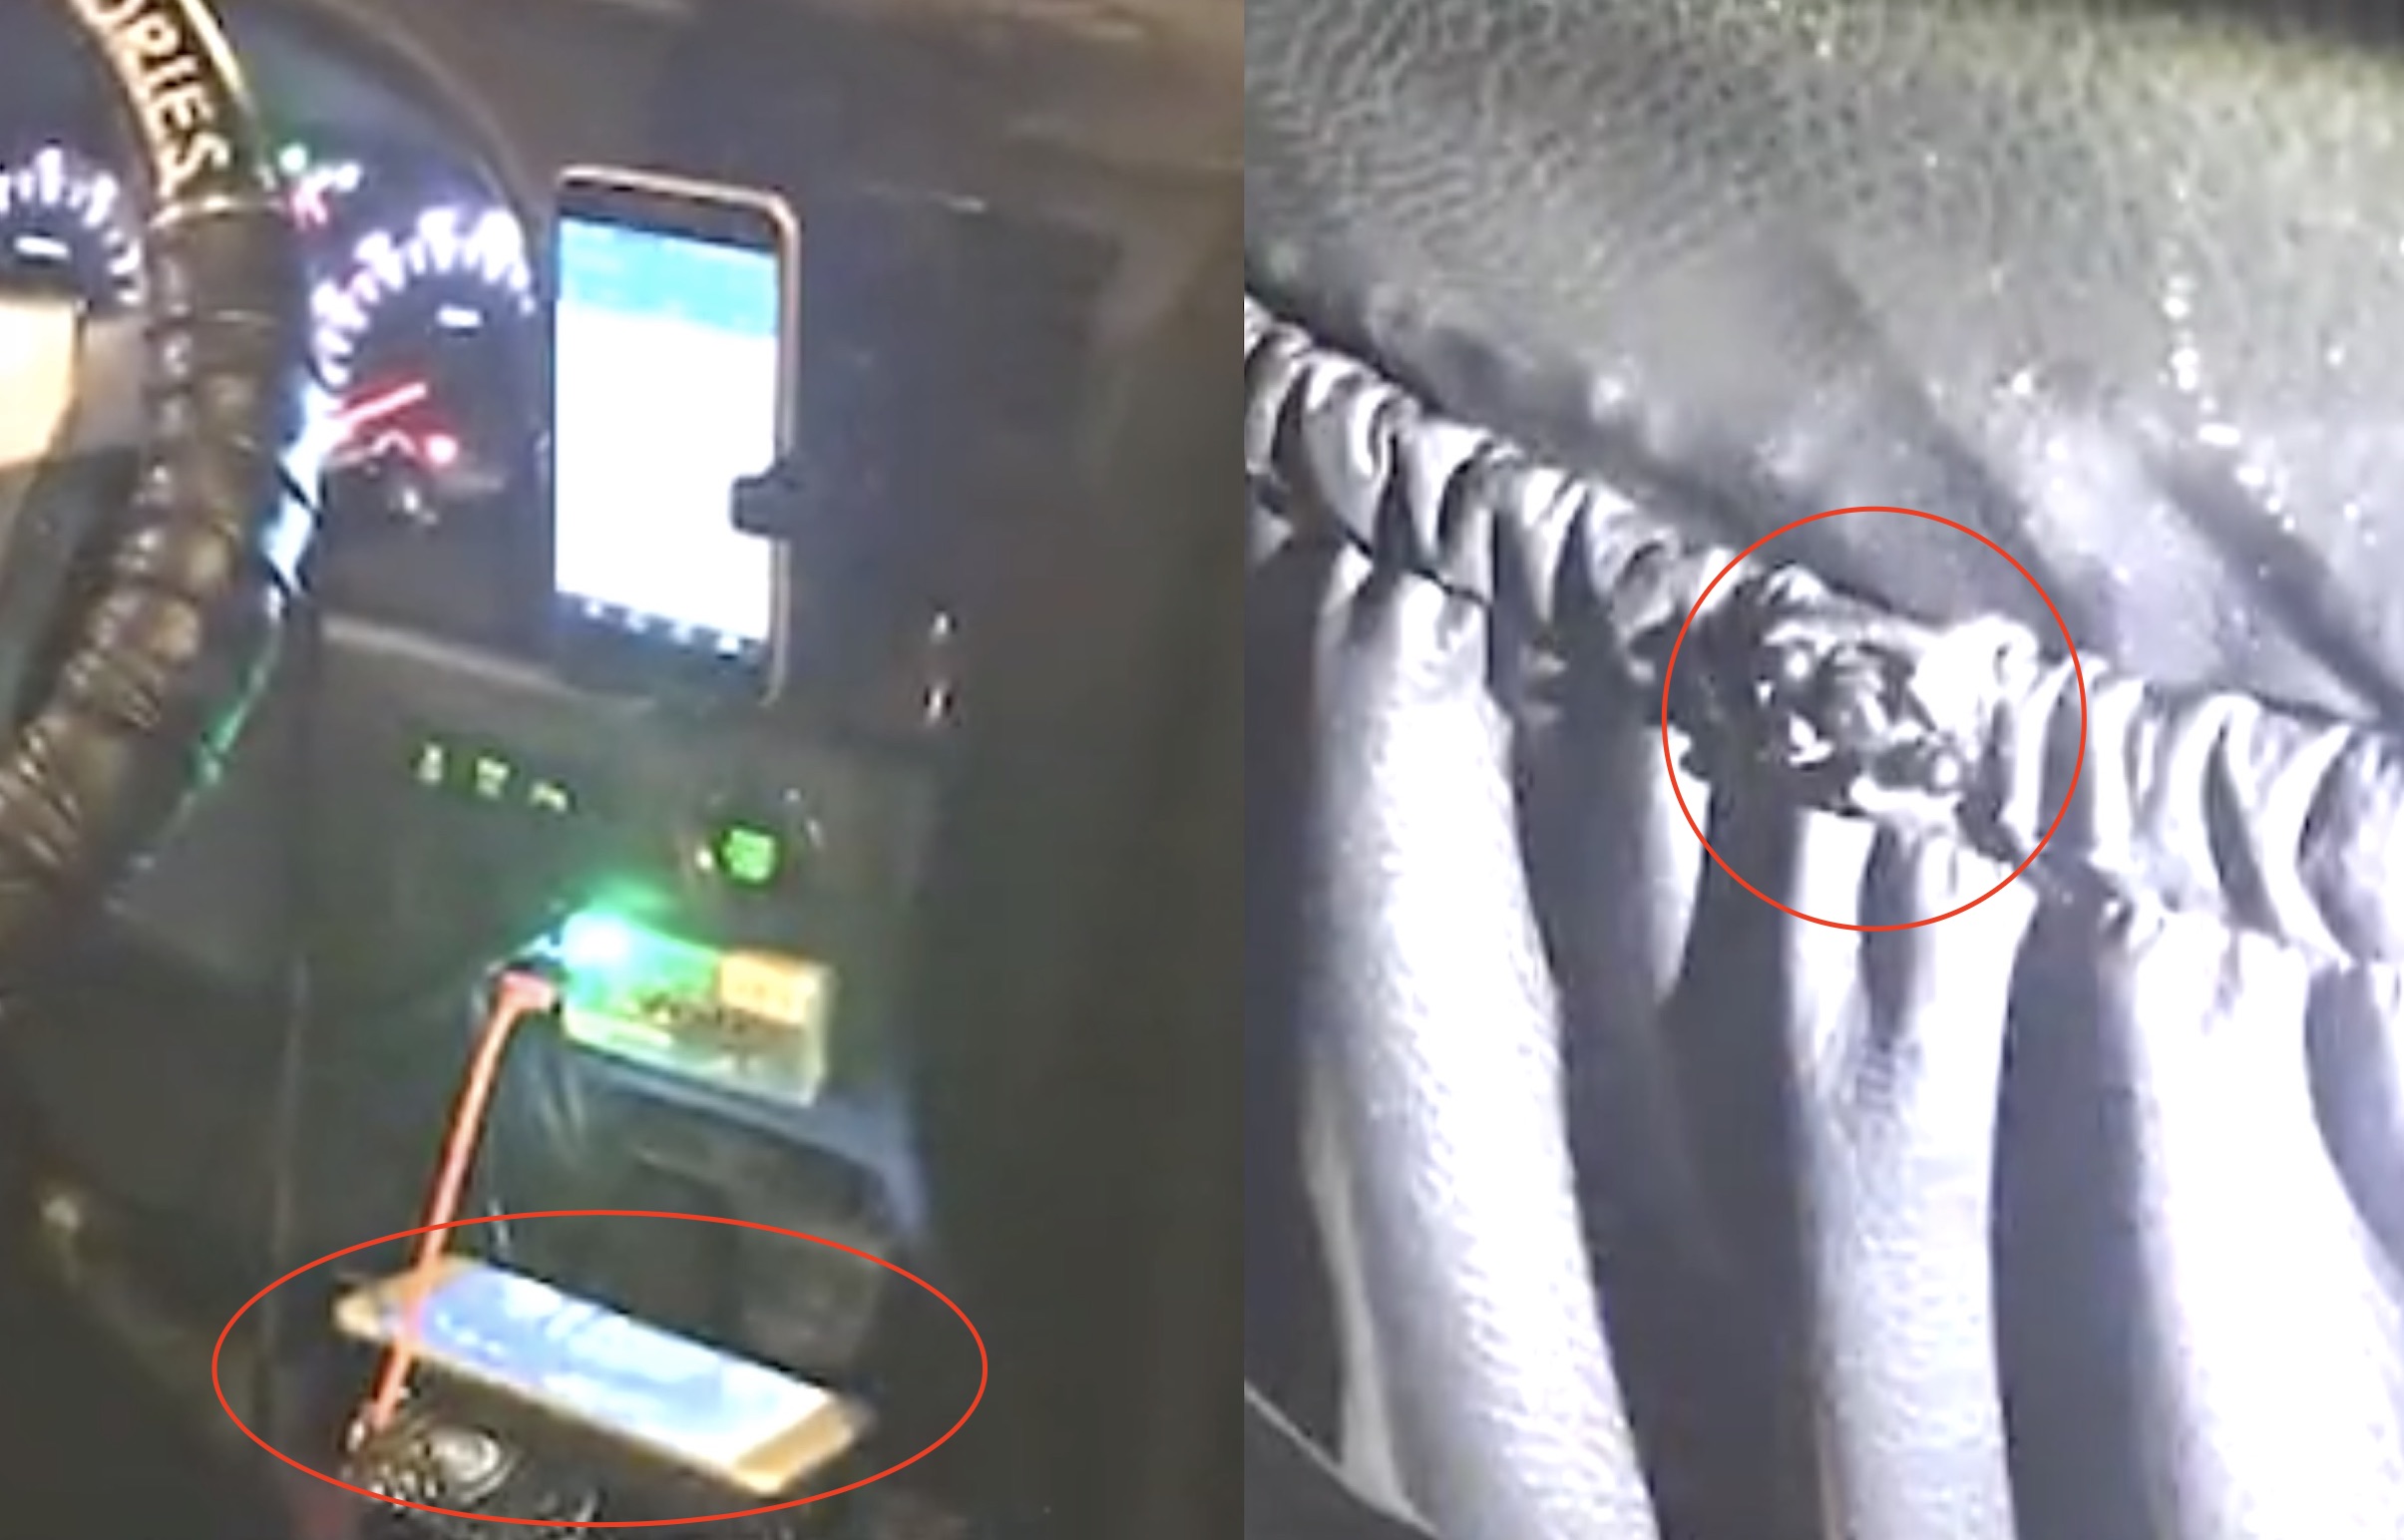 (Left) Police found an iPhone facing upwards with the screen showing a live upskirt video of a female passenger. The video was filmed via a pinhole camera (right) installed in the backseat of the car. Screengrabs via Apple Daily video.